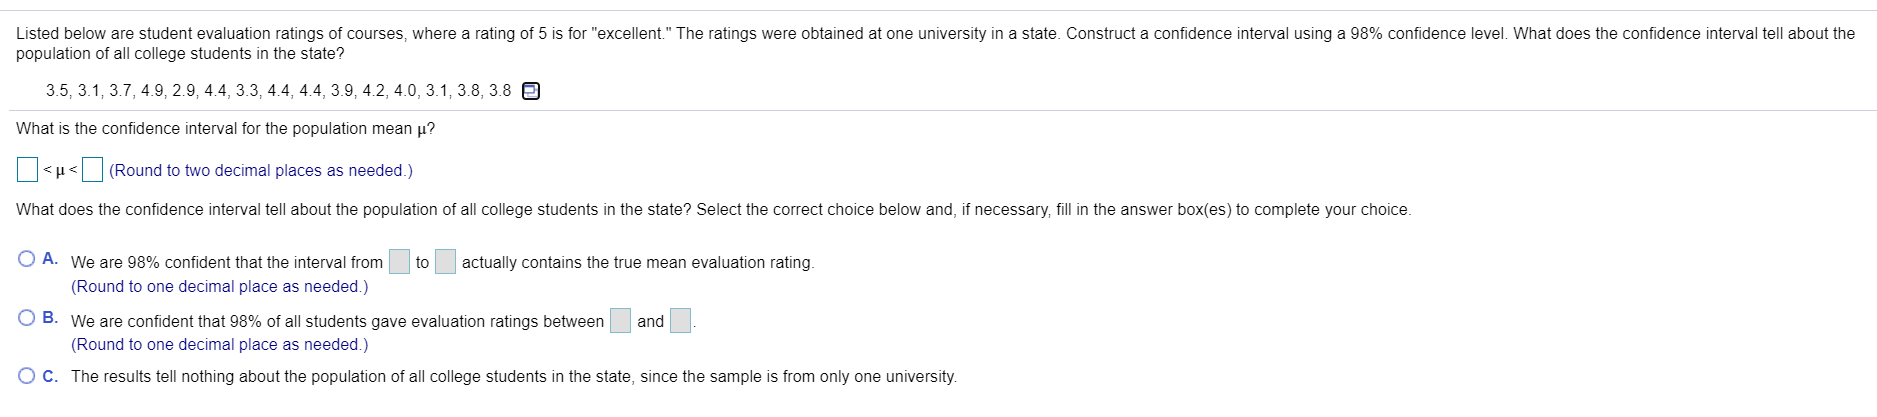 Listed below are student evaluation ratings of courses, where a rating of 5 is for "excellent." The ratings were obtained at one university in a state. Construct a confidence interval using a 98% confidence level. What does the confidence interval tell about the
population of all college students in the state?
3.5, 3.1, 3.7, 4.9, 2.9, 4.4, 3.3, 4.4, 4.4, 3.9, 4.2, 4.0, 3.1, 3.8, 3.8 e
What is the confidence interval for the population mean µ?
<µ< (Round to two decimal places as needed.)
What does the confidence interval tell about the population of all college students in the state? Select the correct choice below and, if necessary, fill in the answer box(es) to complete your choice.
O A. We are 98% confident that the interval from
to
actually contains the true mean evaluation rating.
(Round to one decimal place as needed.)
O B. We are confident that 98% of all students gave evaluation ratings between
and
(Round to one decimal place as needed.)
OC. The results tell nothing about the population of all college students in the state, since the sample is from only one university.
